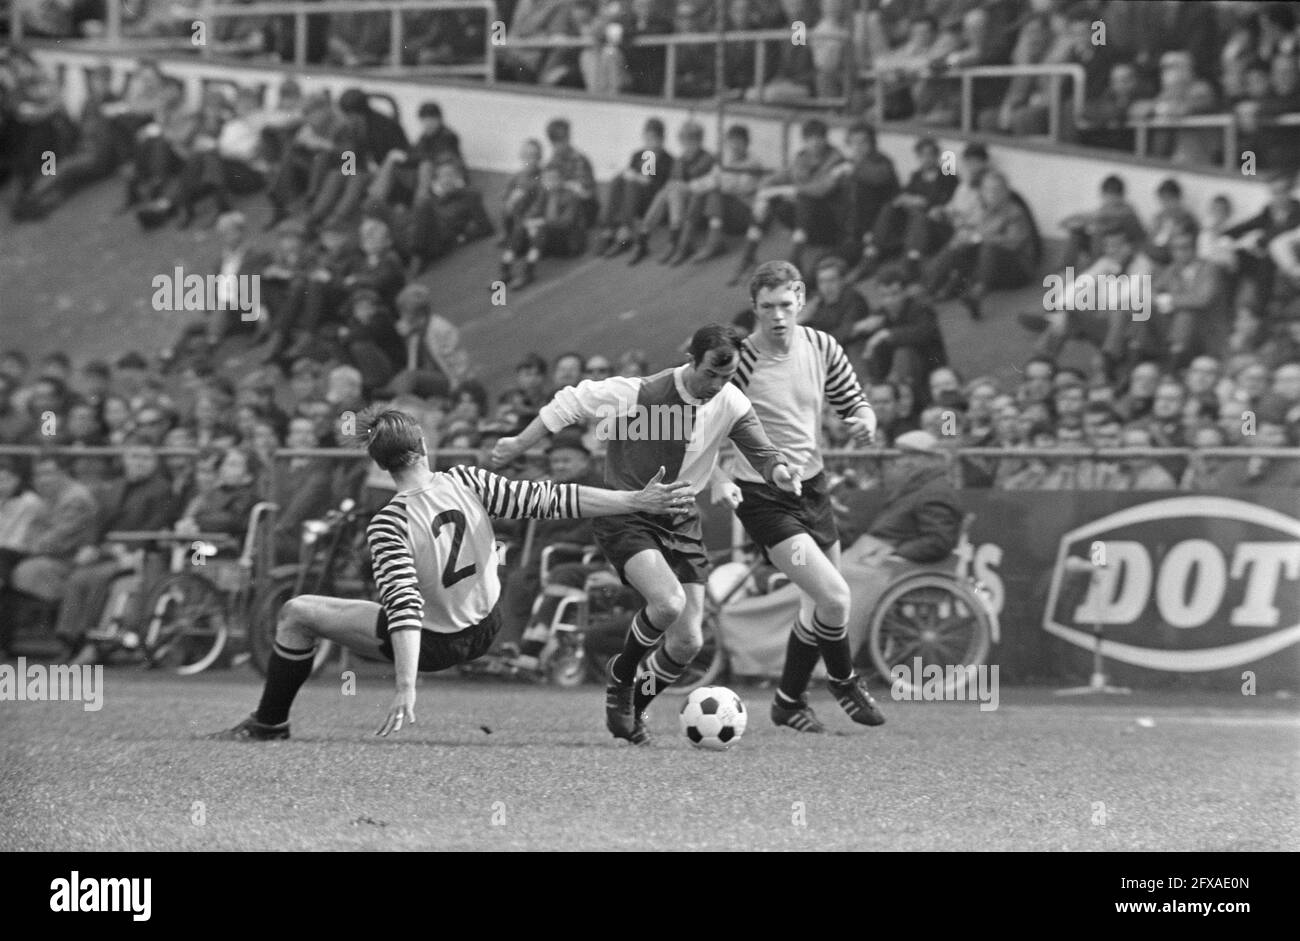 DOS against Feijenoord 3-0; Coen Moulijn is stopped with arm, April 27, 1969, sports, soccer, The Netherlands, 20th century press agency photo, news to remember, documentary, historic photography 1945-1990, visual stories, human history of the Twentieth Century, capturing moments in time Stock Photo